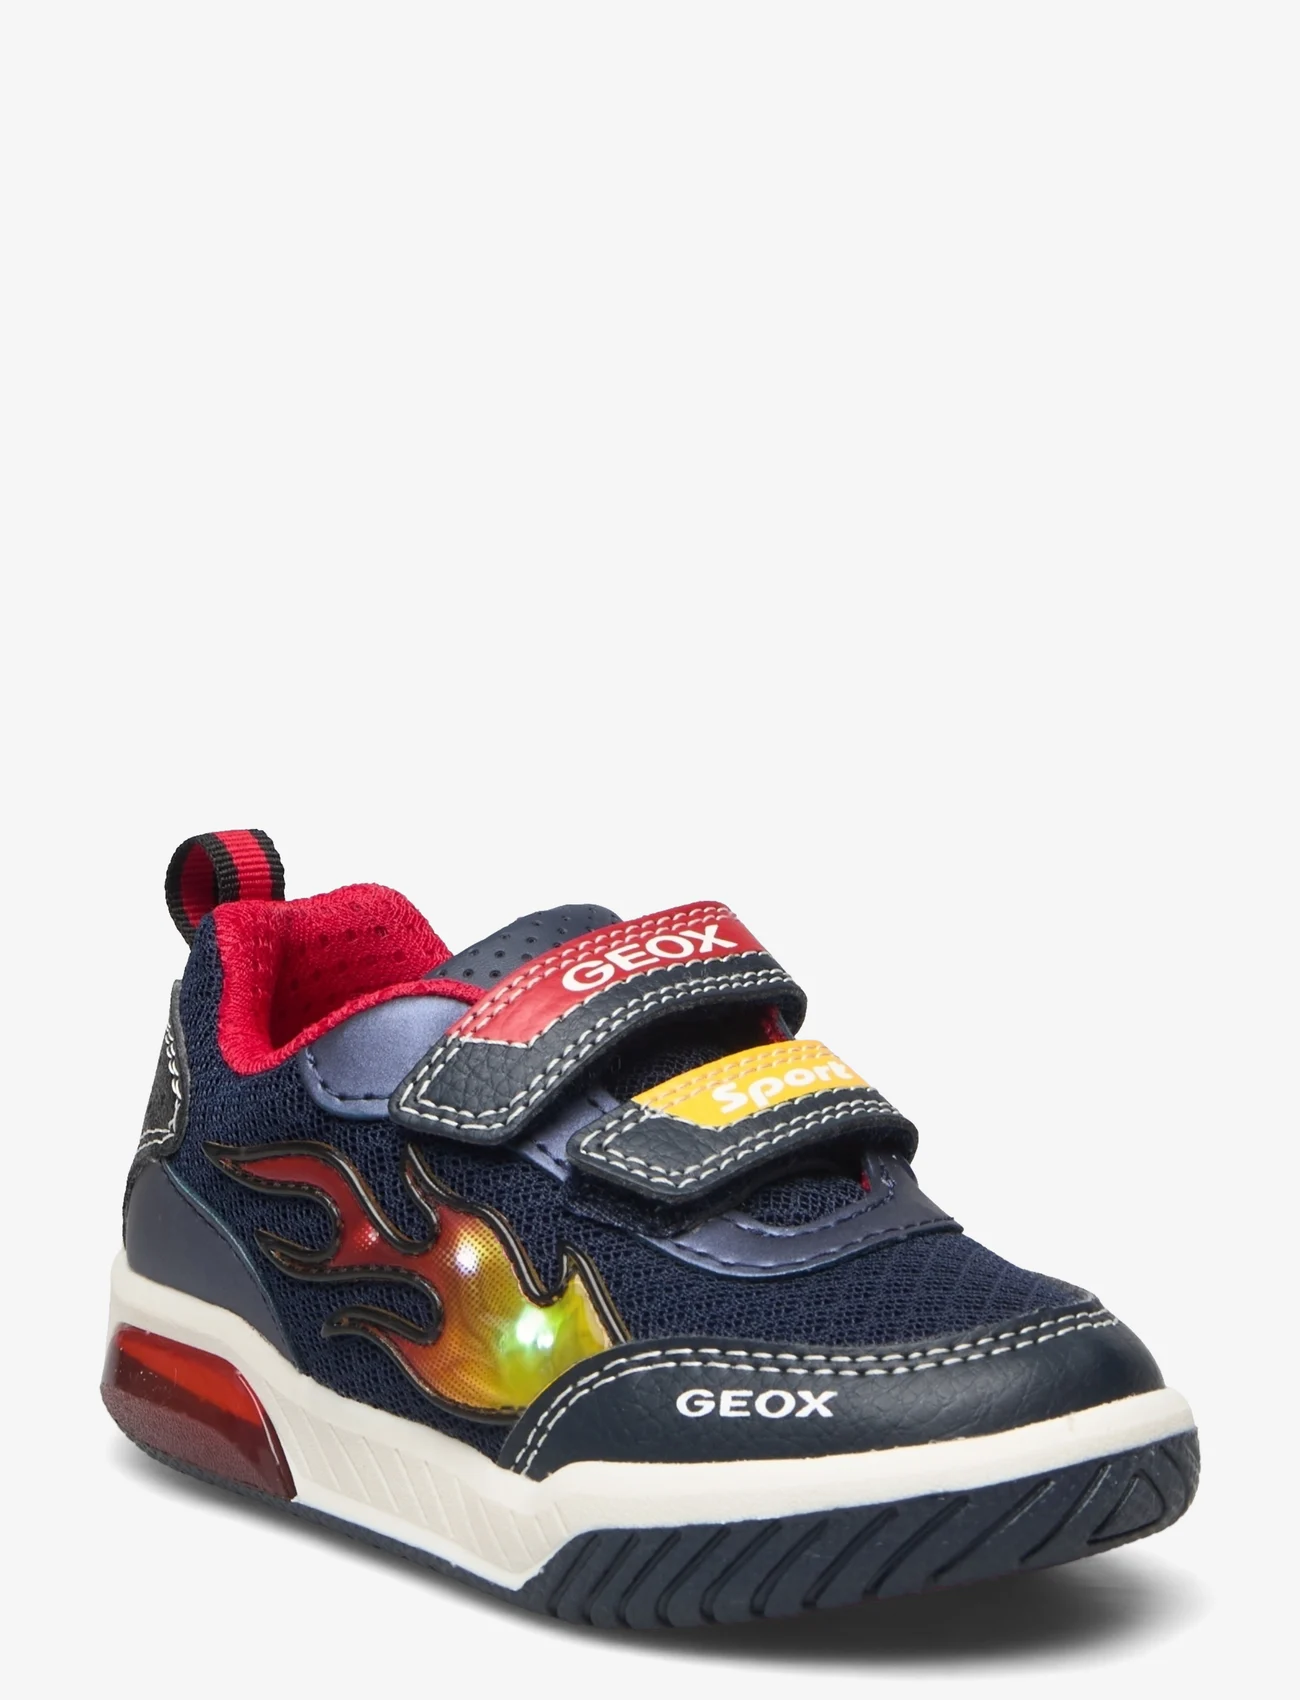 GEOX J Inek Boy (Navy/red), (60 €) | Large selection of outlet-styles |